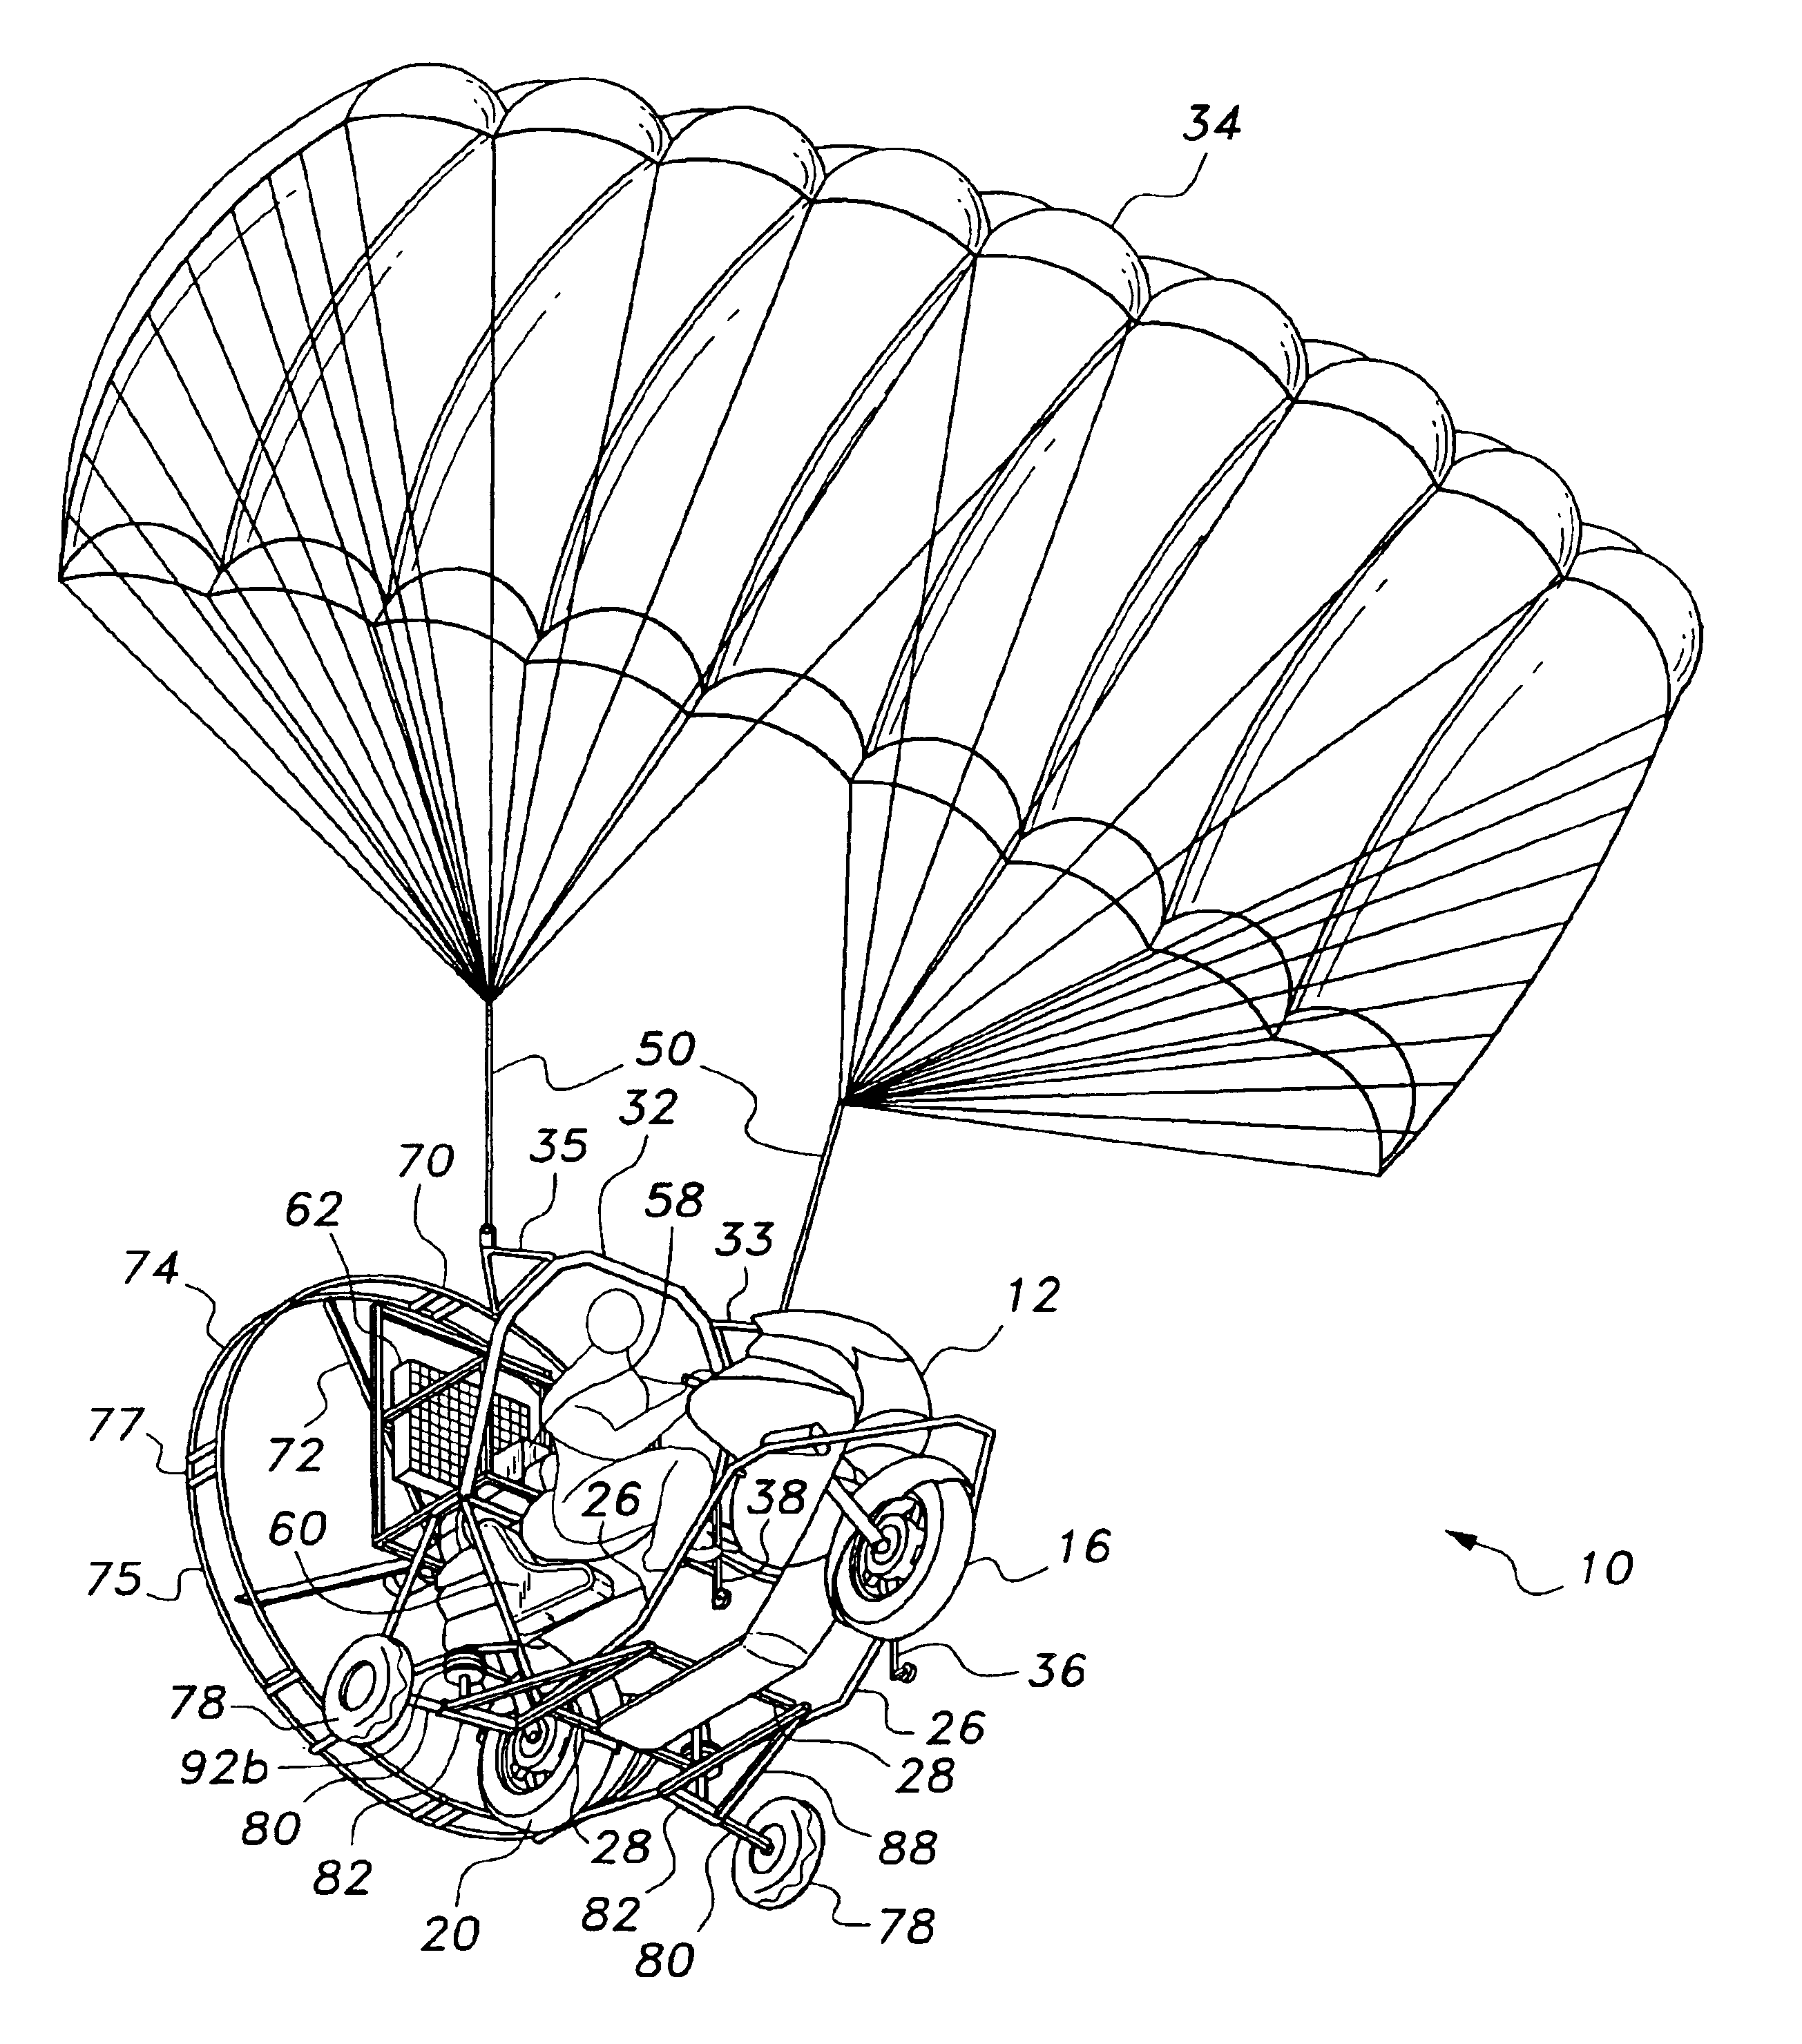 Combination powered parachute and motorcycle